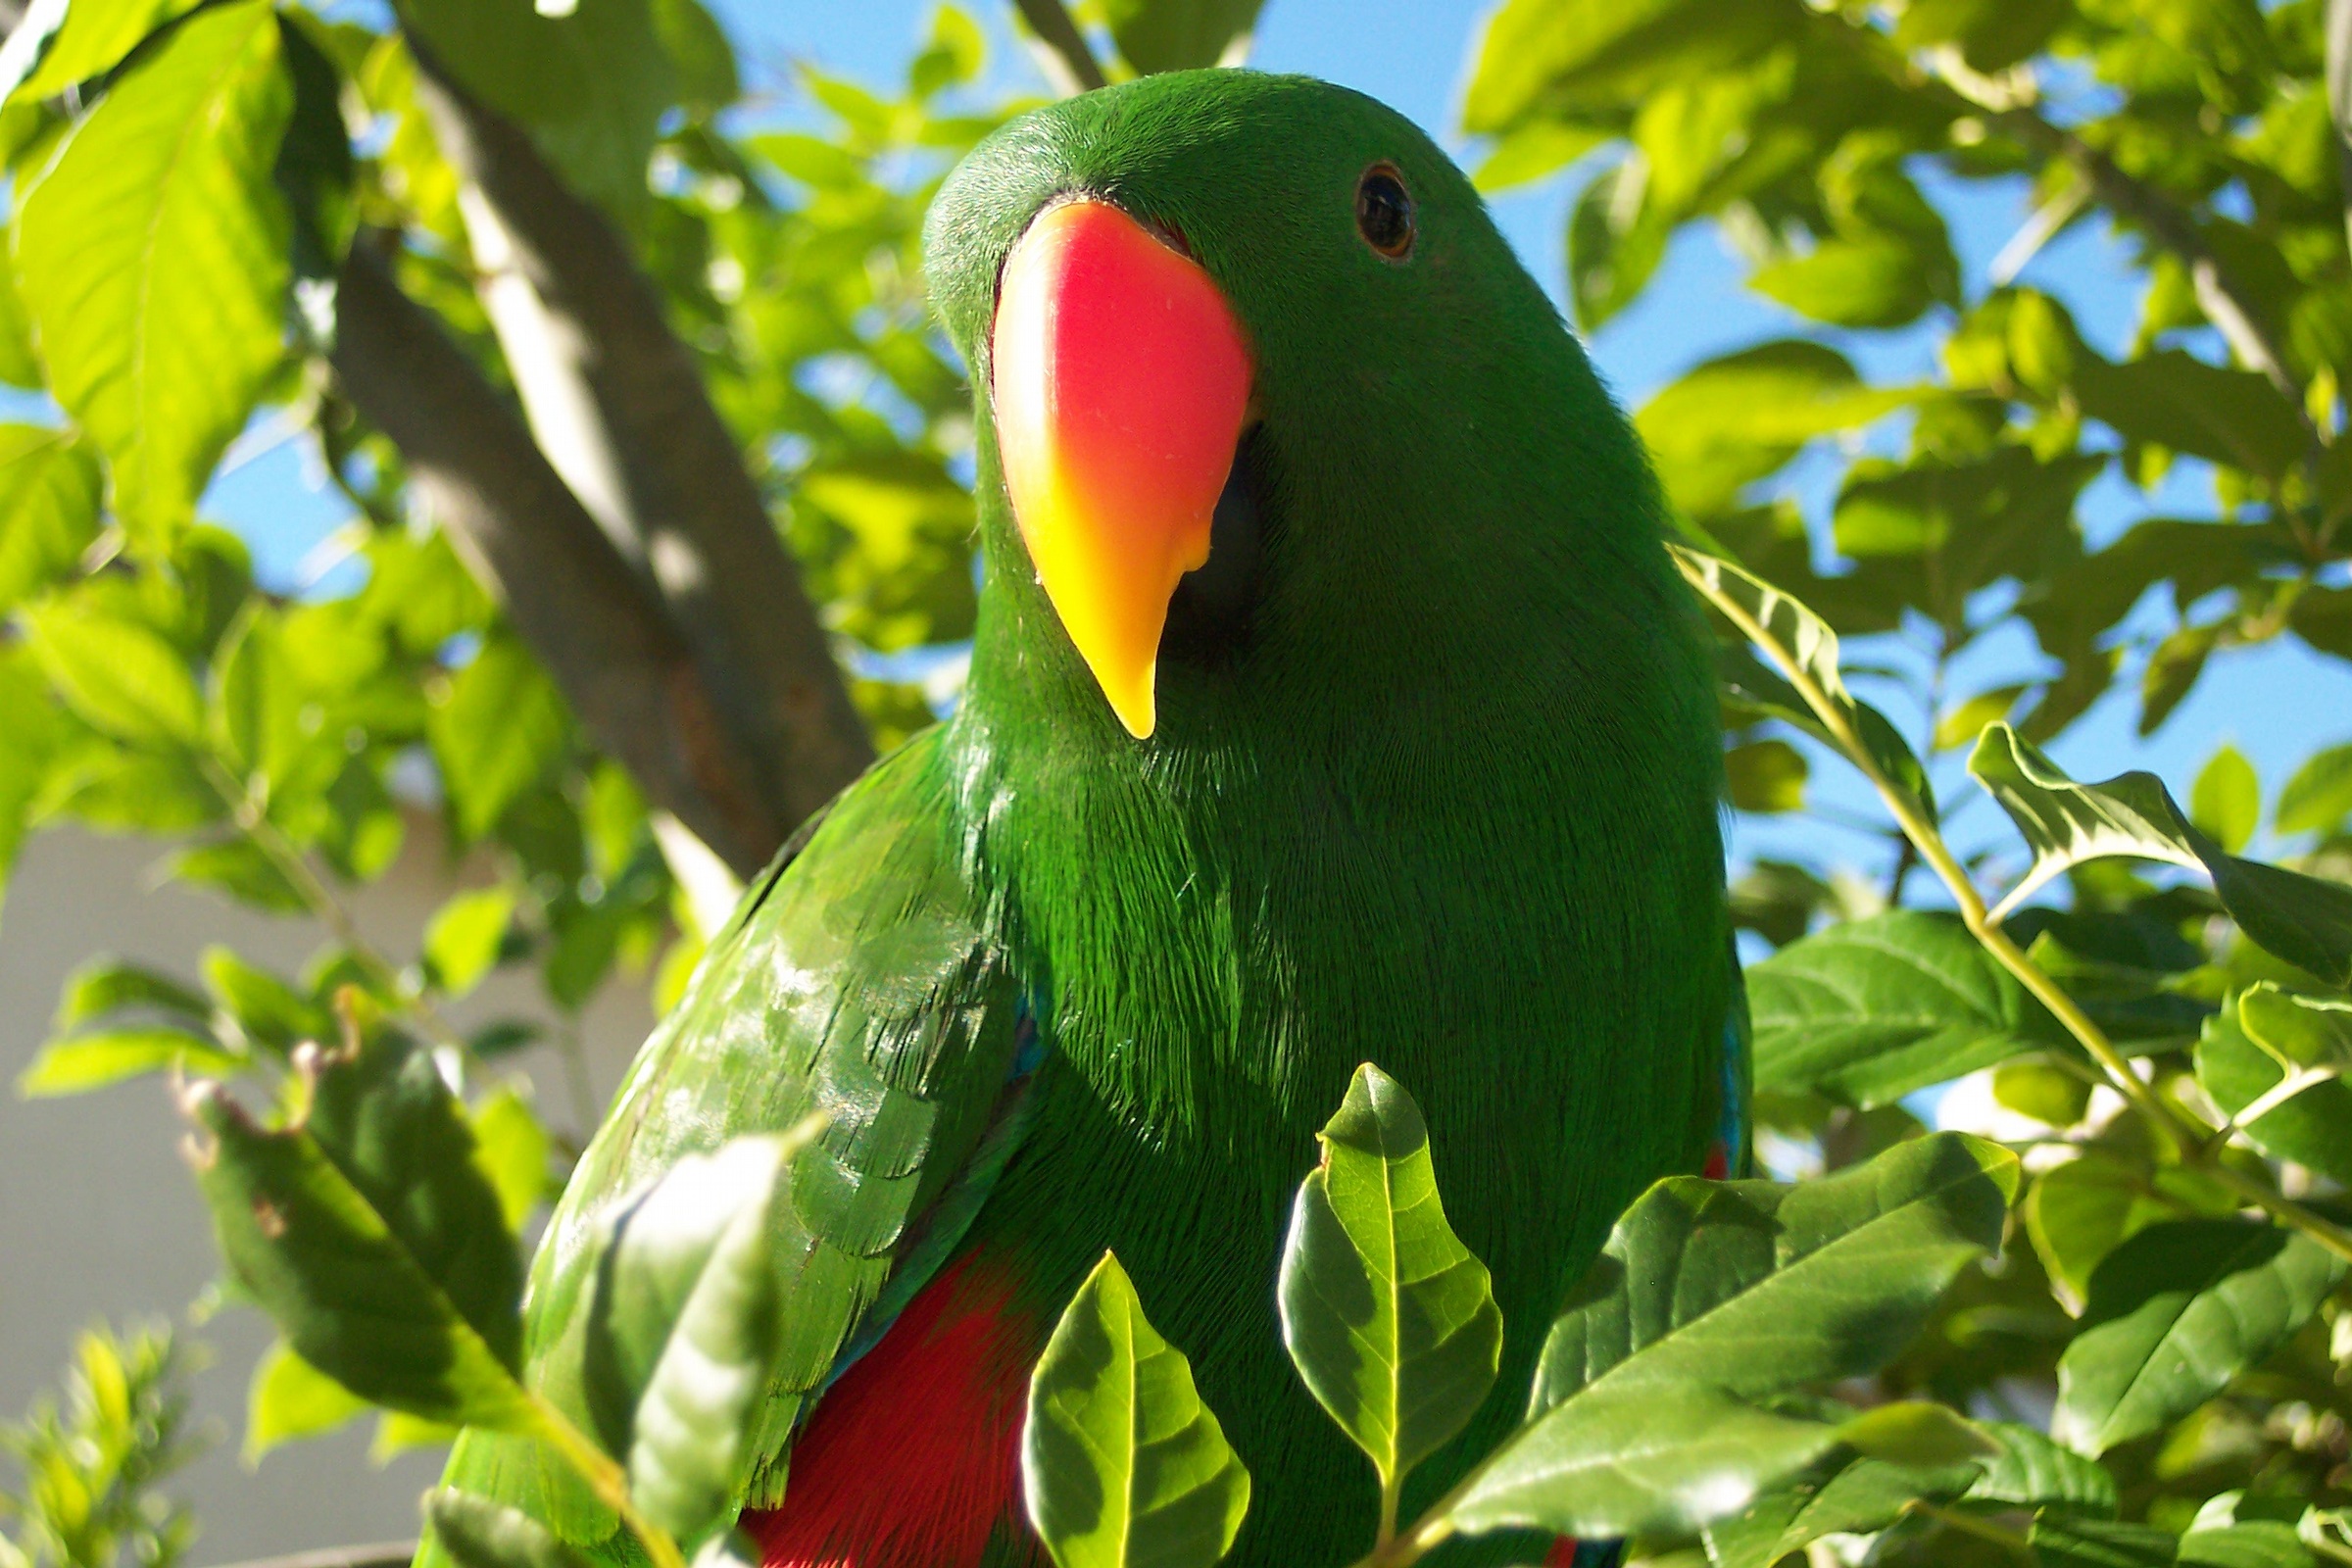 Eclectus parrot perched on a branch, displaying gorgeous green and red feathers.